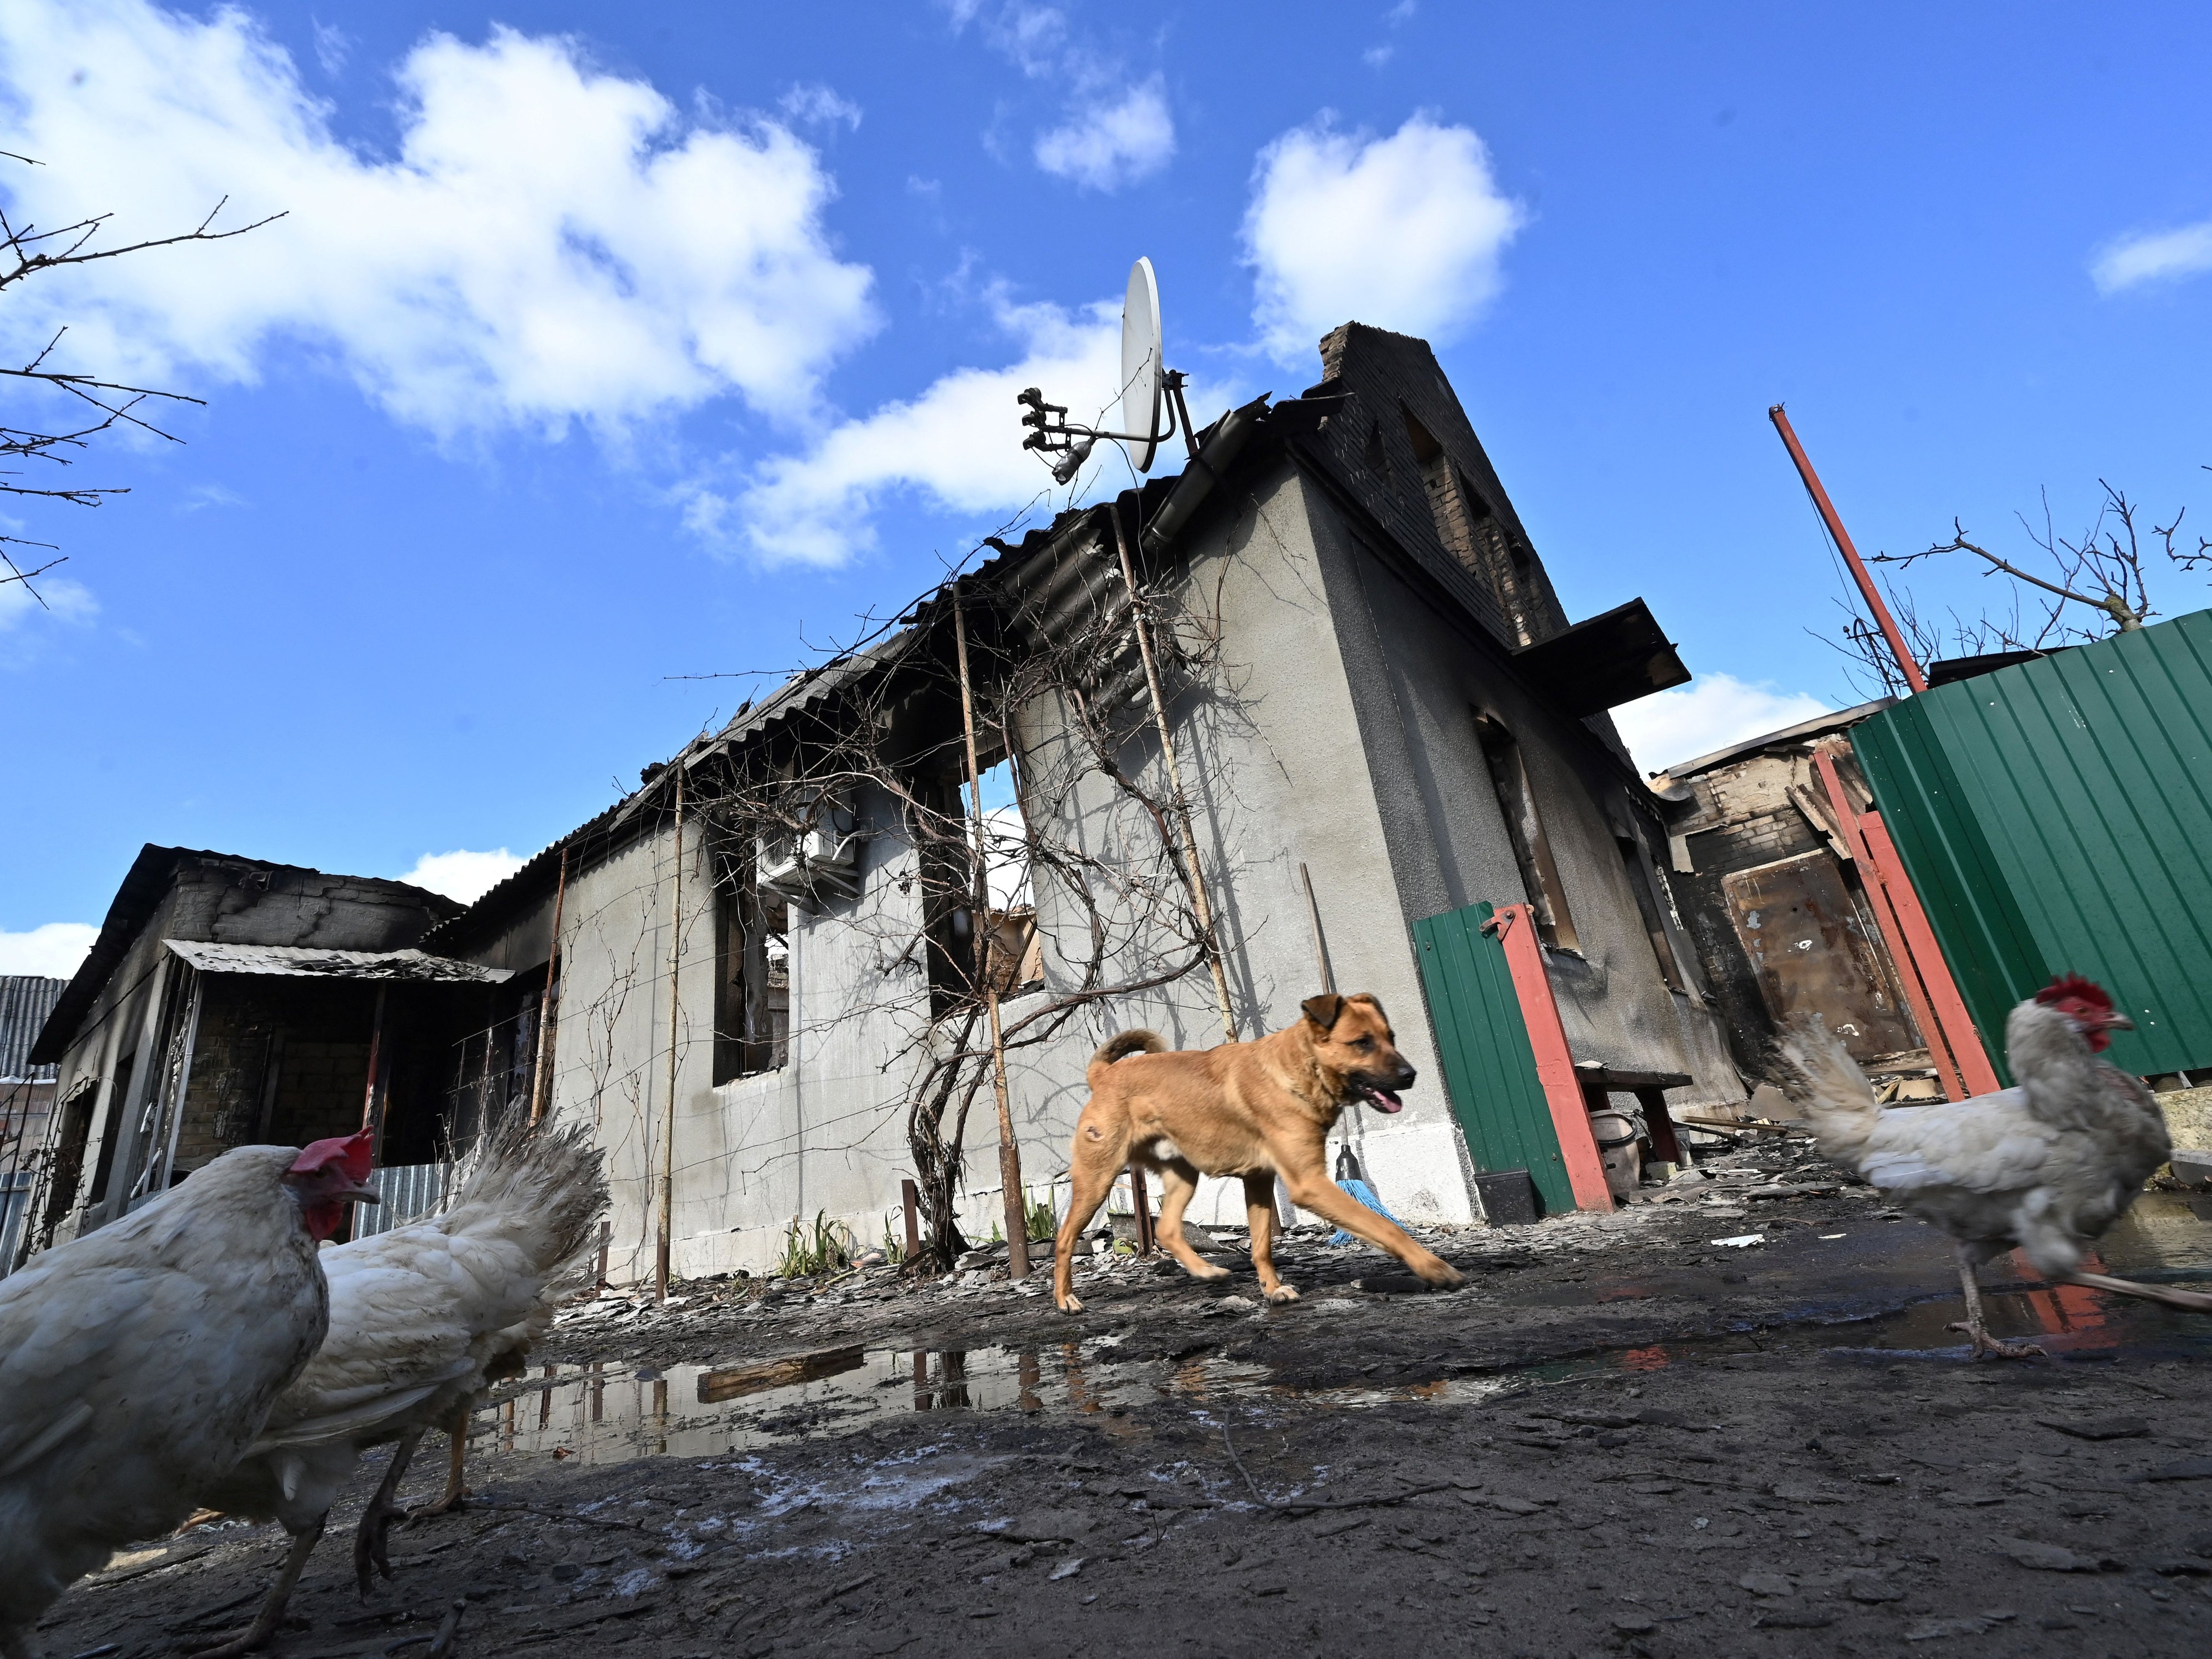 Homes have been damaged by Russian shelling in the invasion of Ukraine